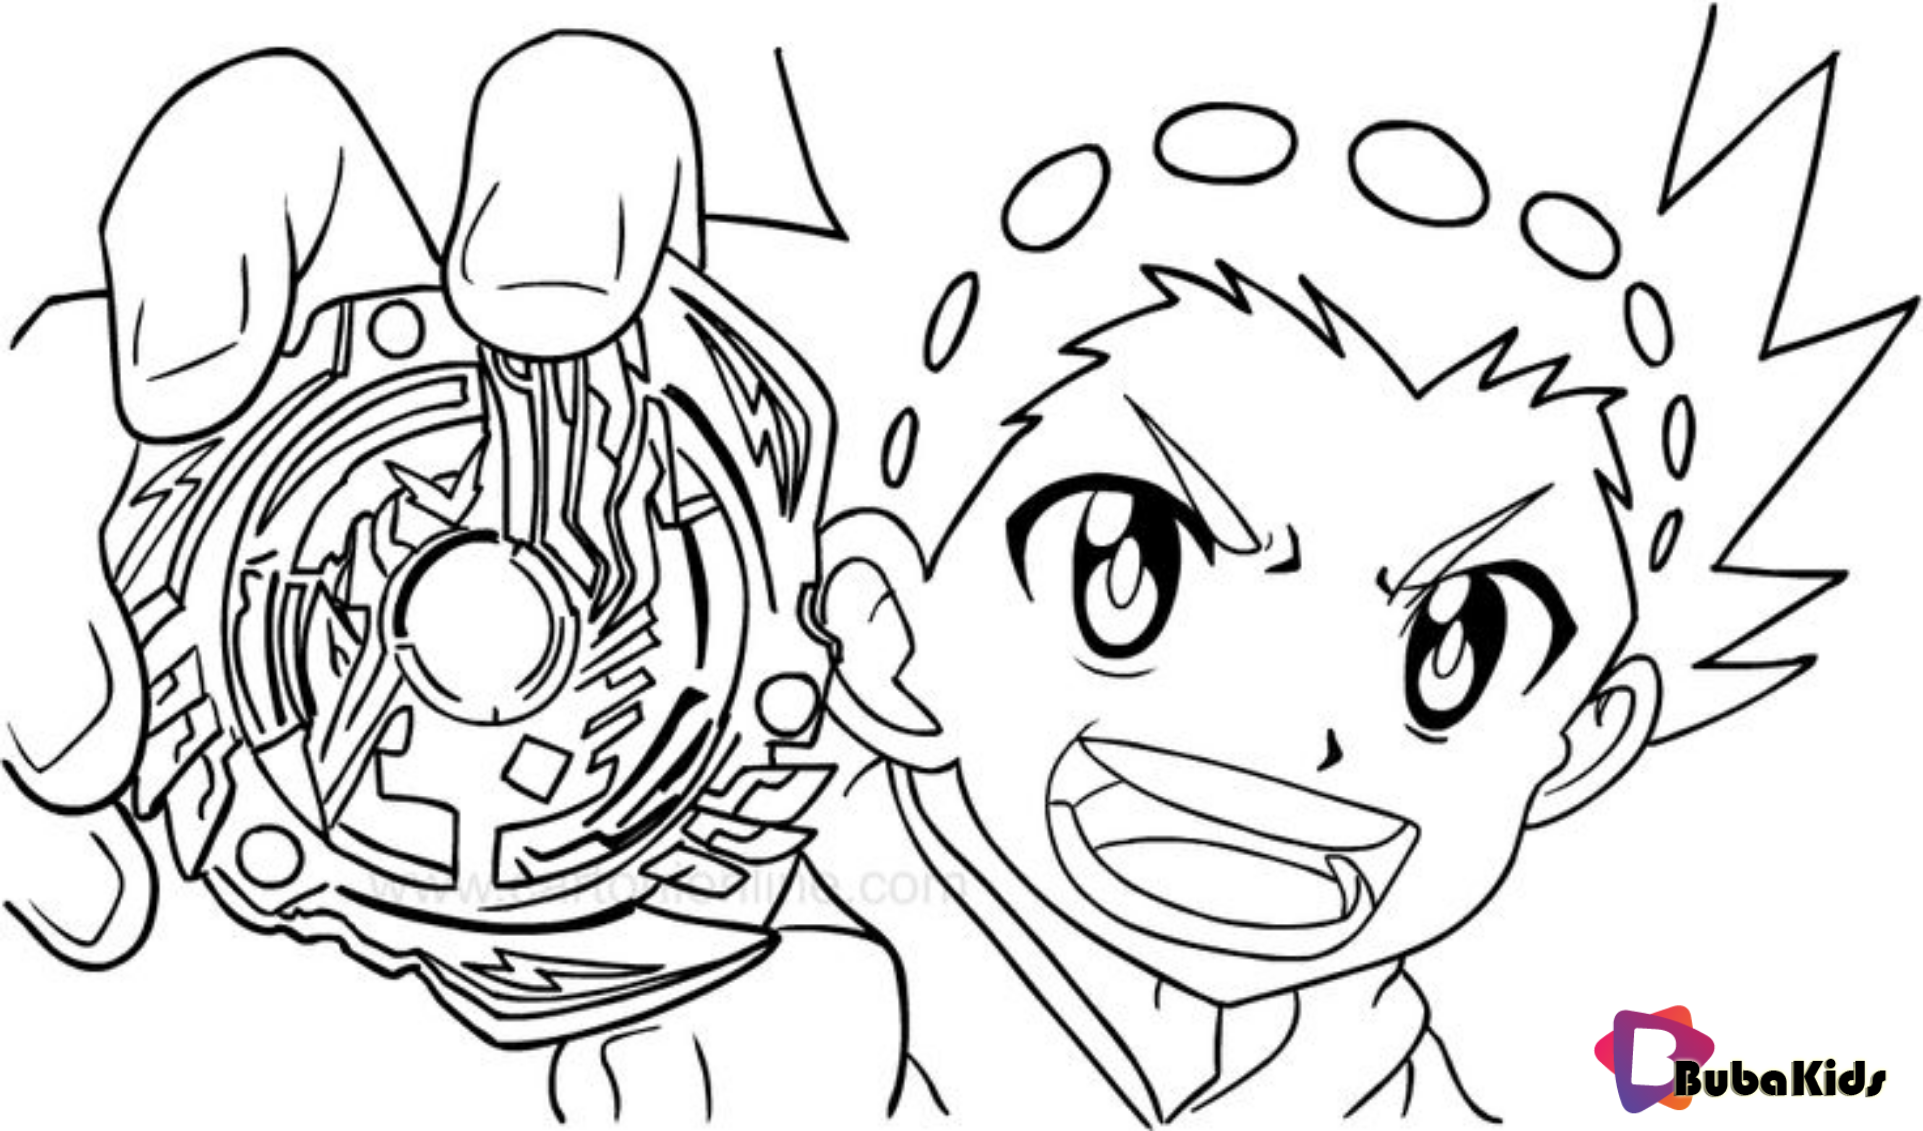 Beyblade Burst coloring page Wallpaper